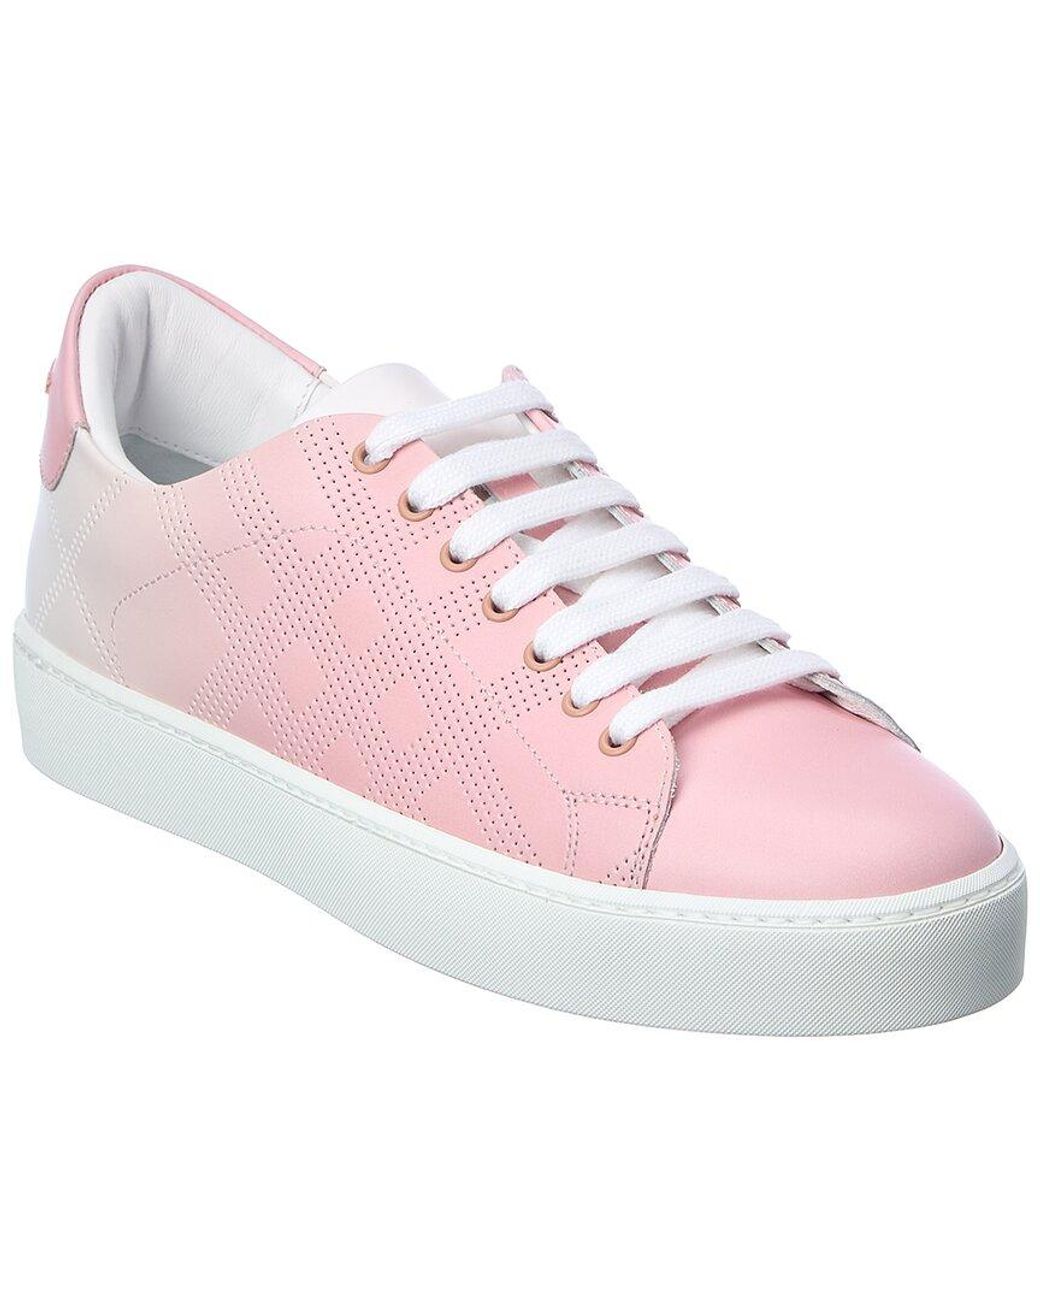 Burberry Westford Perforated Check Leather Sneaker in Pink | Lyst